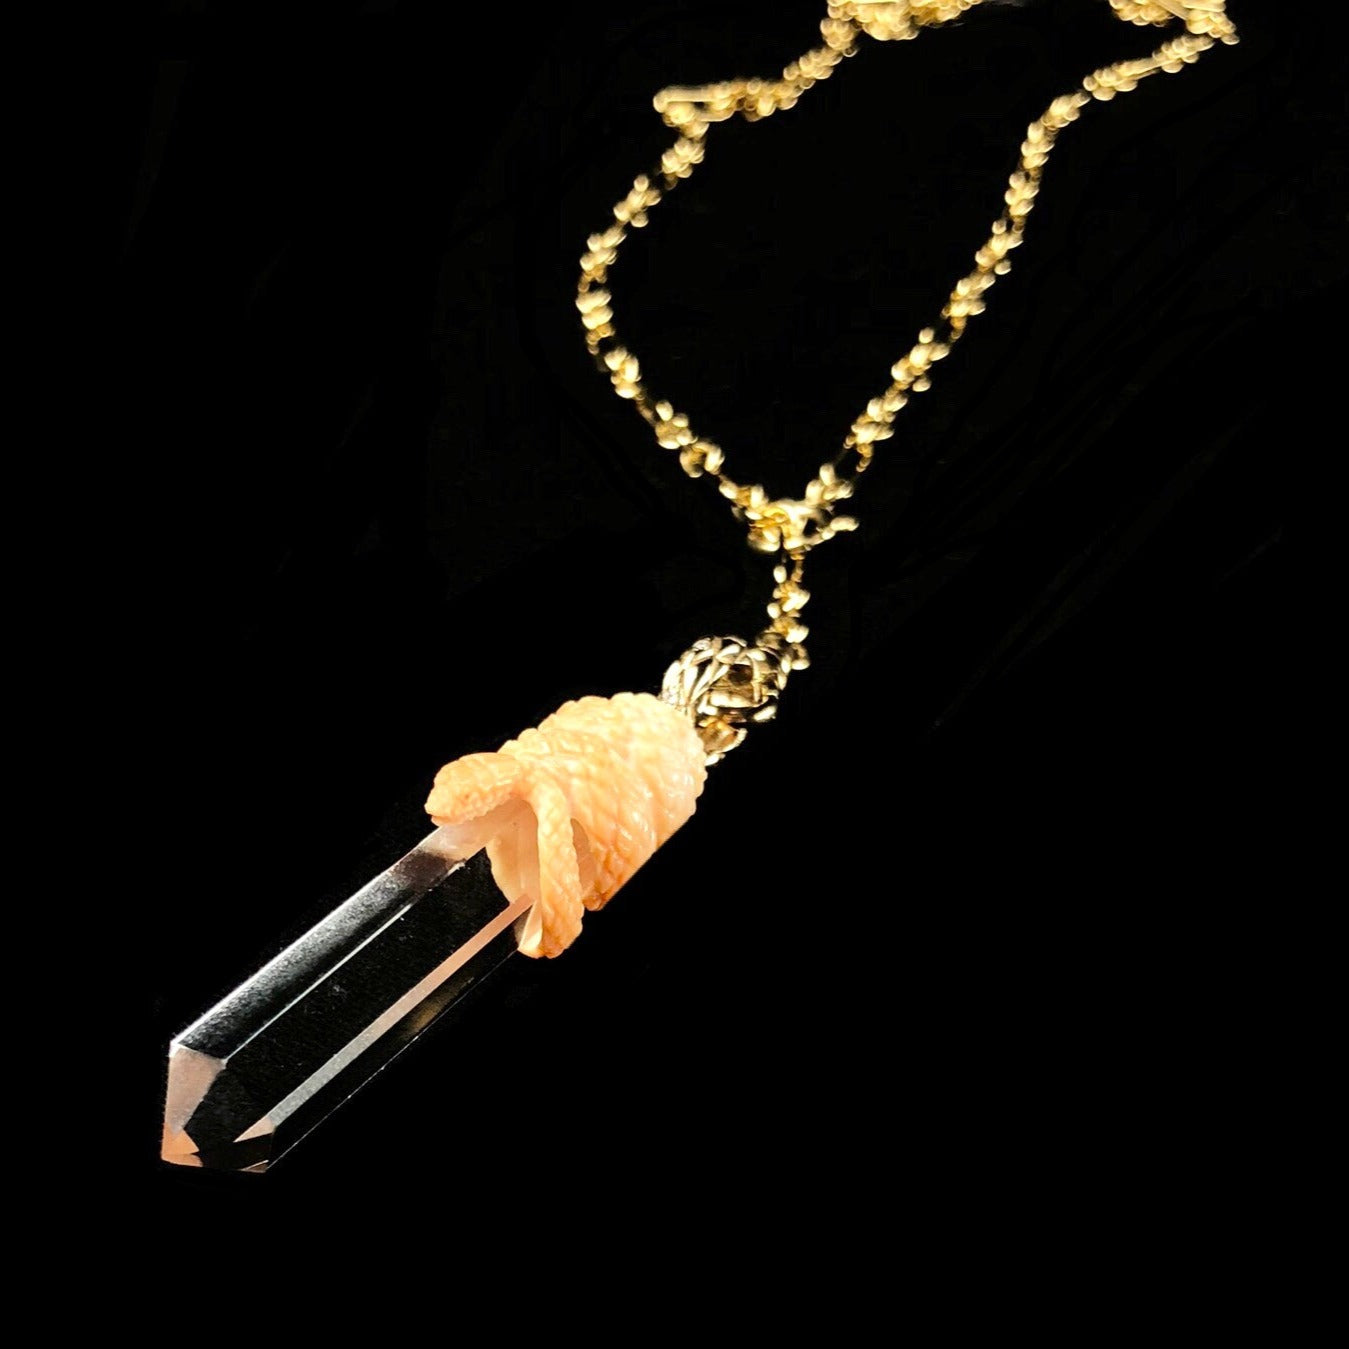 Clear crystal with light orange snake coiled about its top with gold bail with gold chain in background